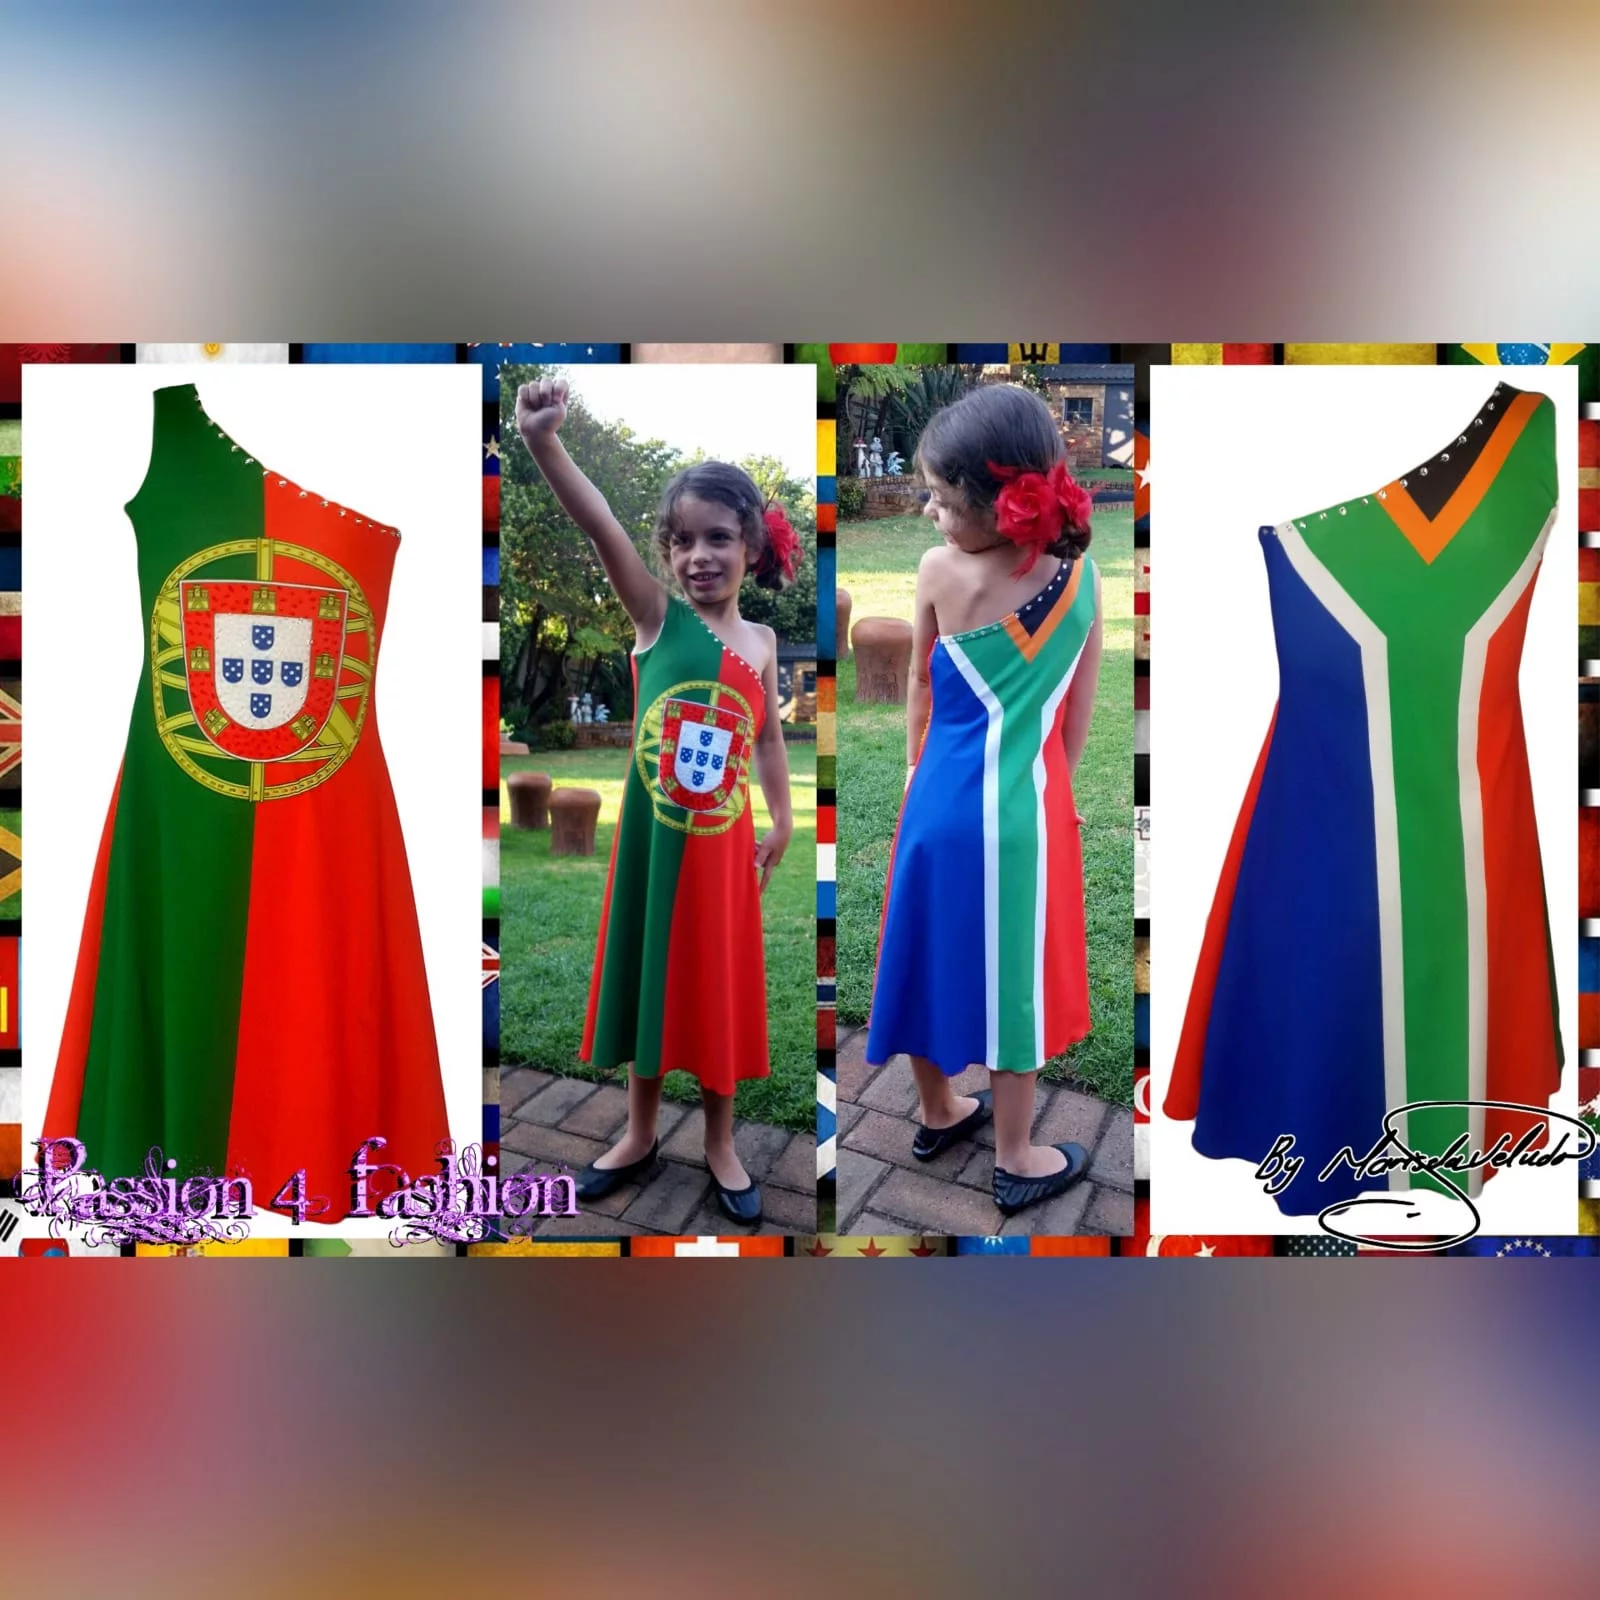 Portuguese flag and south african flag dress 5 single shoulder dress with the portuguese flag in the front and the south african flag at the back. Bead detailing on the front and the back. Worn for heritage day. She won a prize for best dressed.